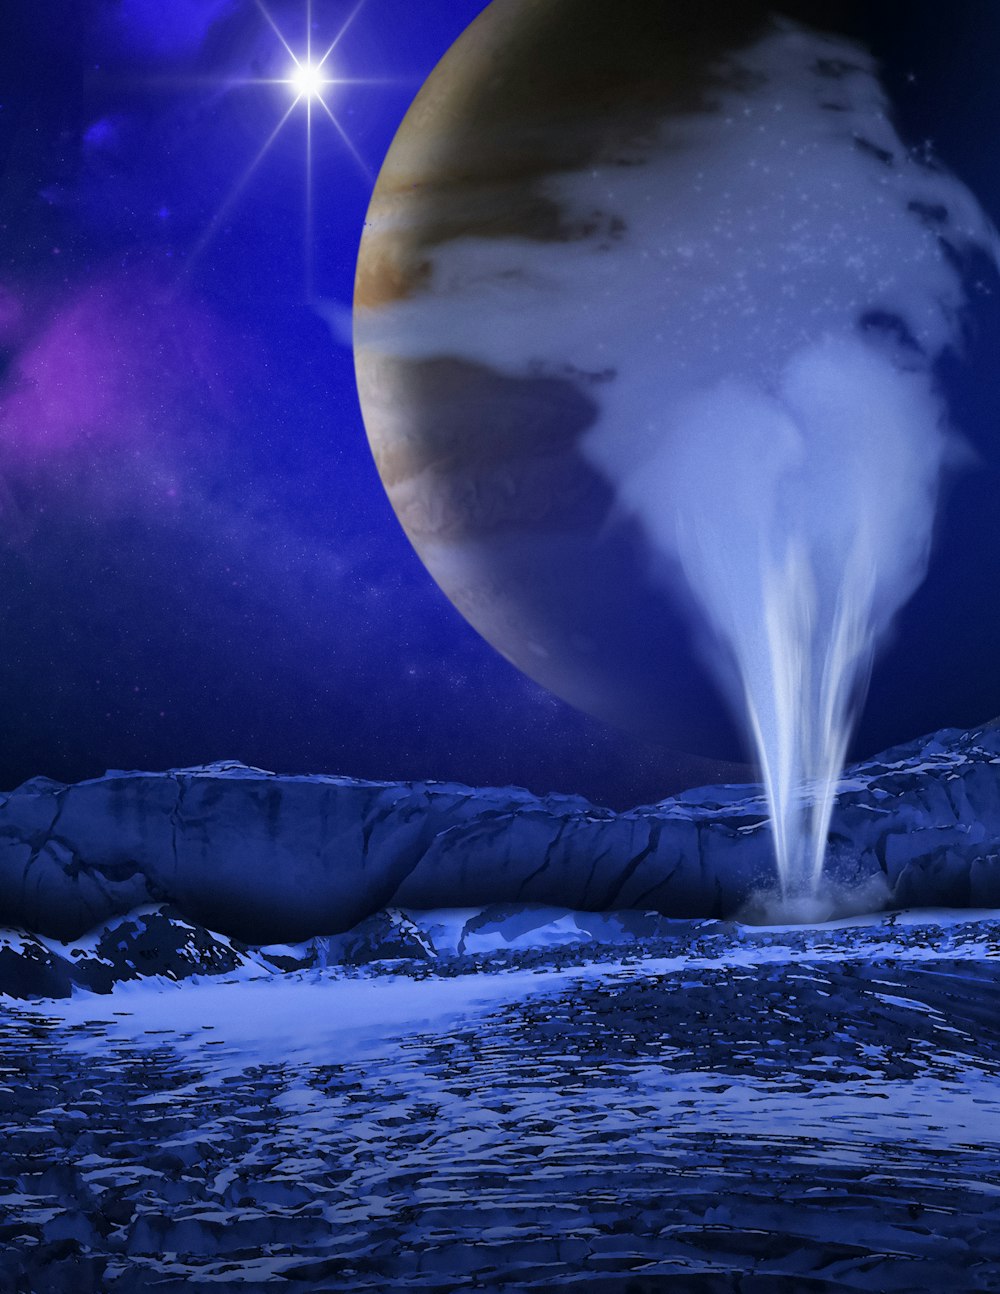 an artist's rendering of a planet with a star in the background